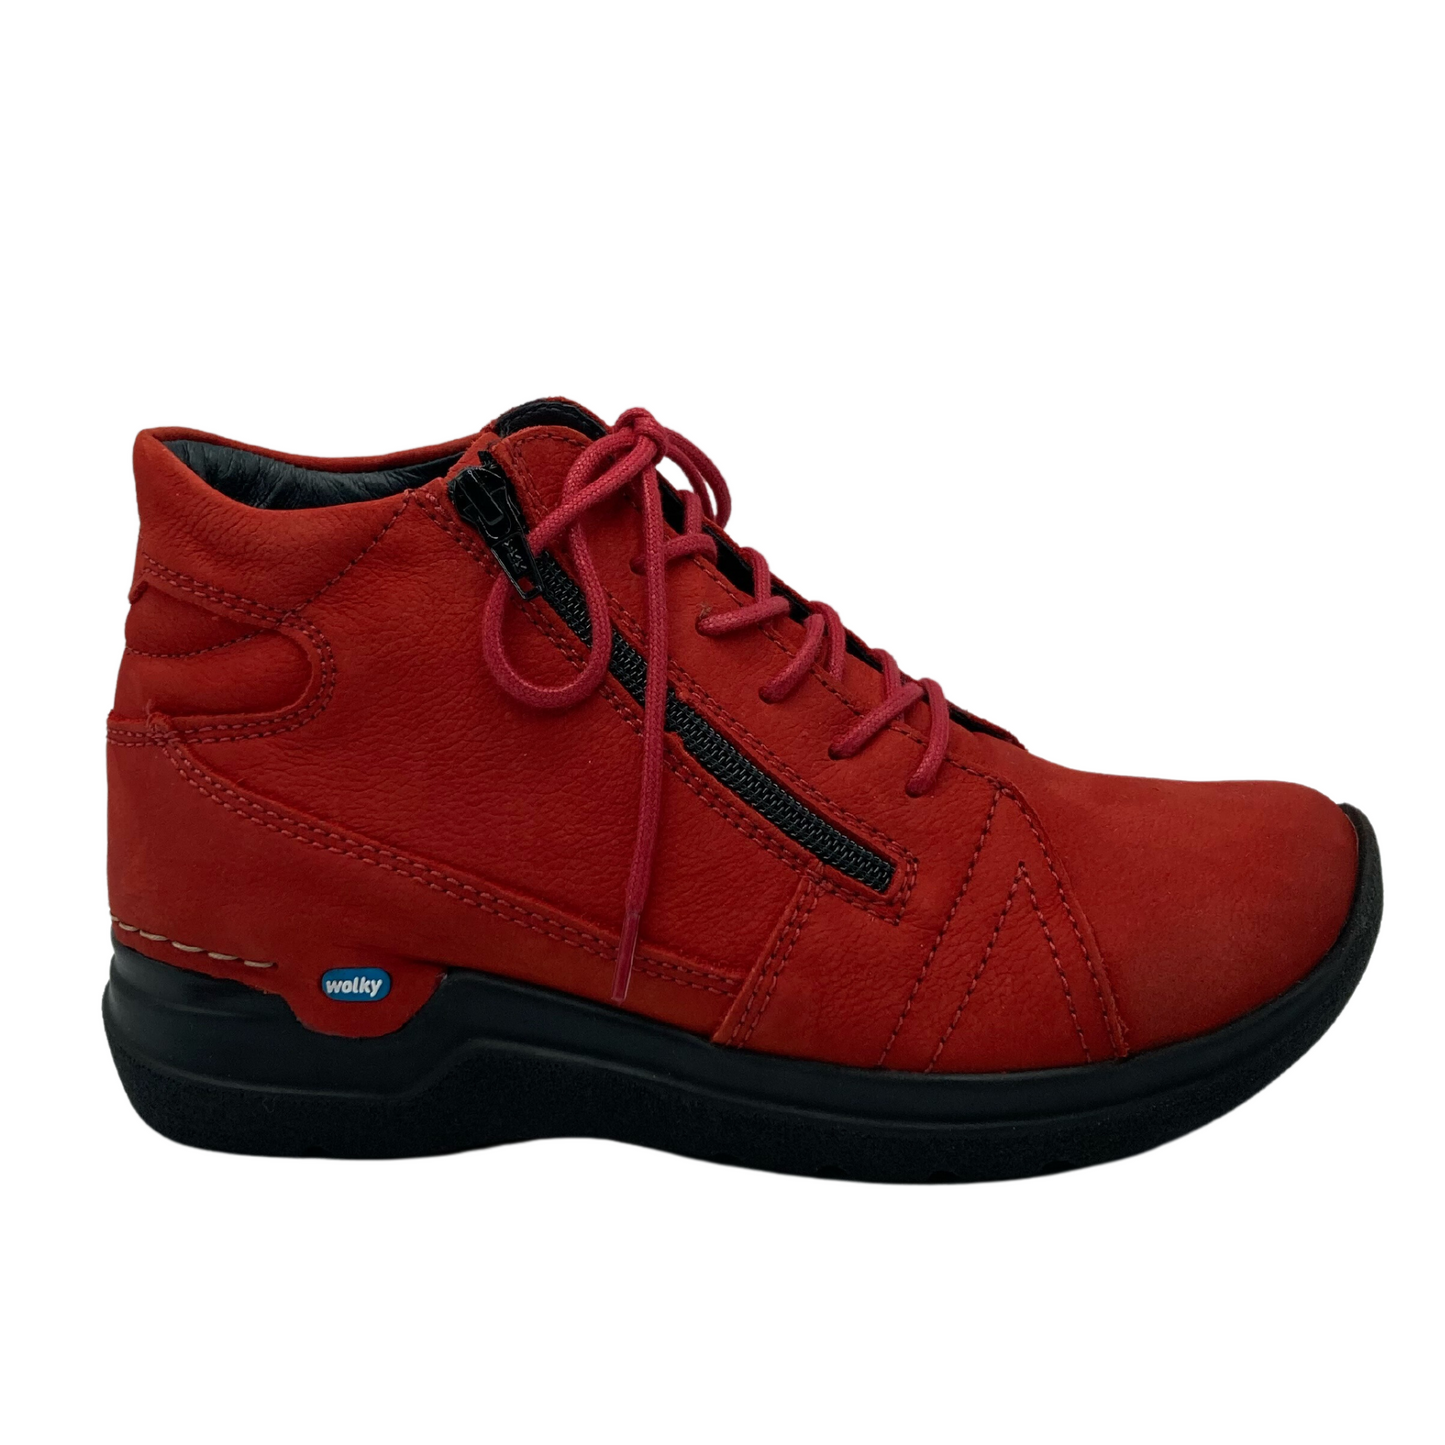 Right facing view of red leather walking bootie with matching laces and side zipper closure